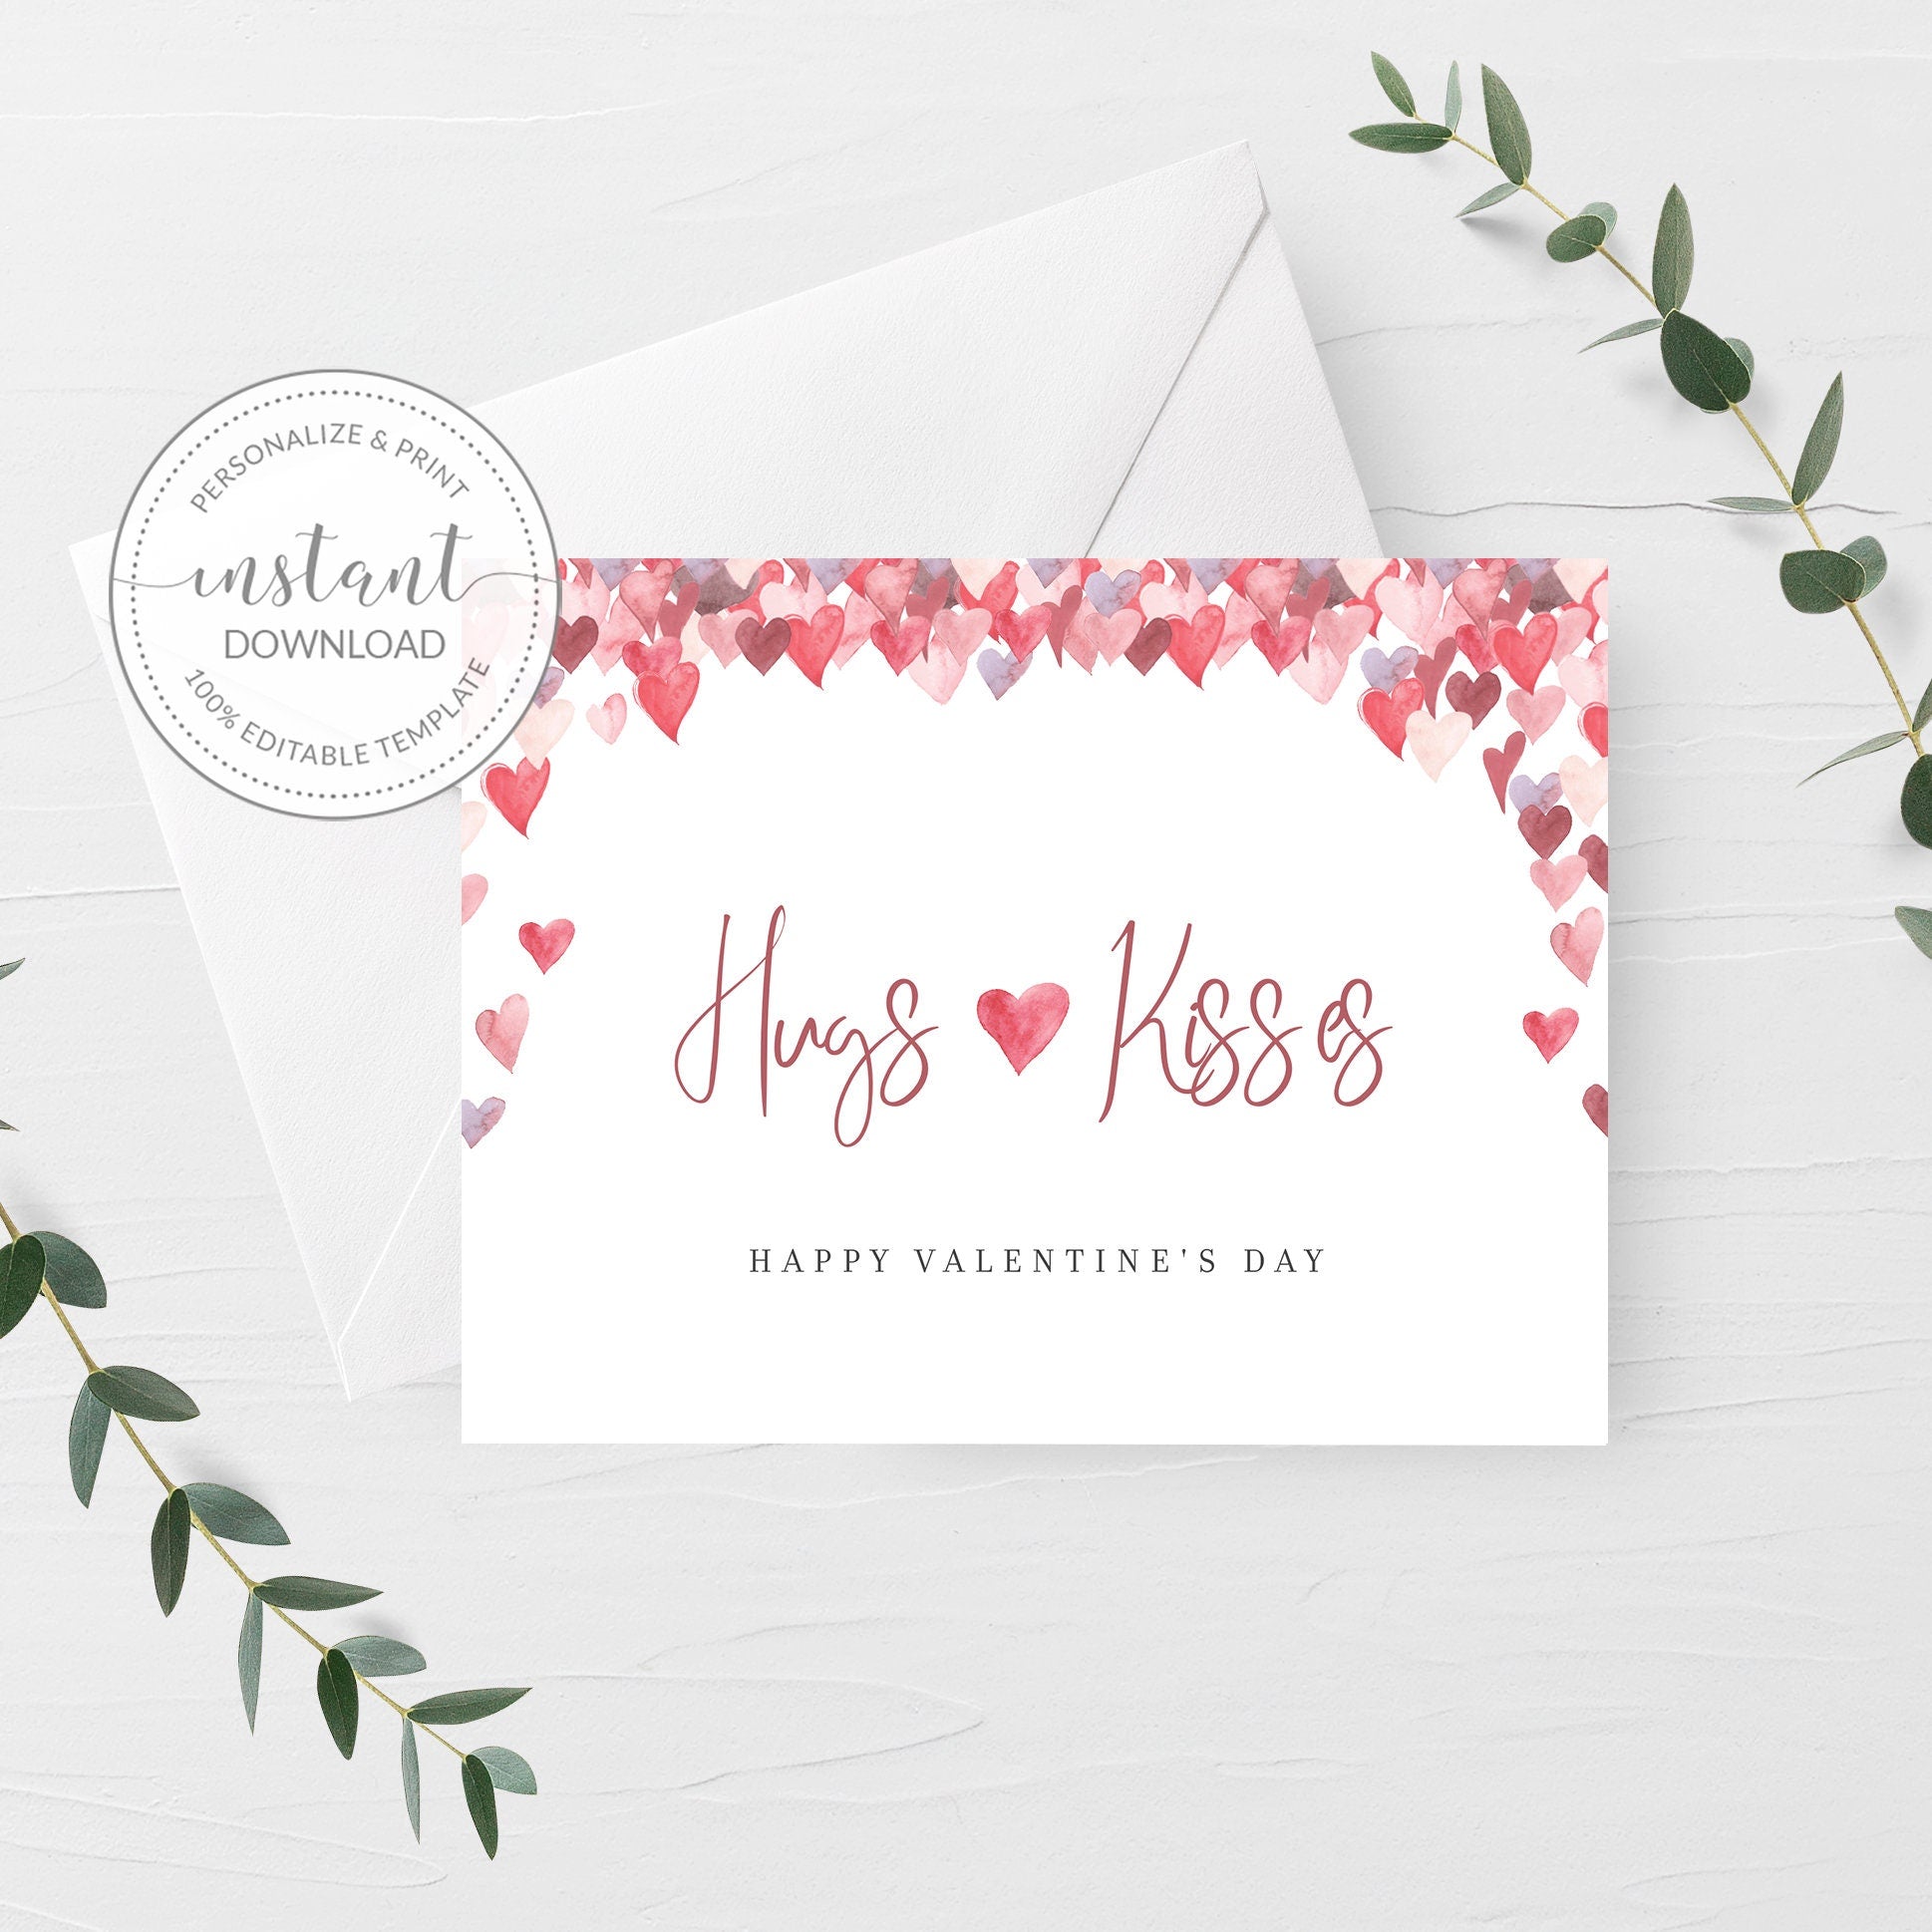 Printable Valentines Card Template, Happy Valentines Day Card, Editable Be My Valentine, Valentines Card DIGITAL DOWNLOAD, A2 Size - VH100